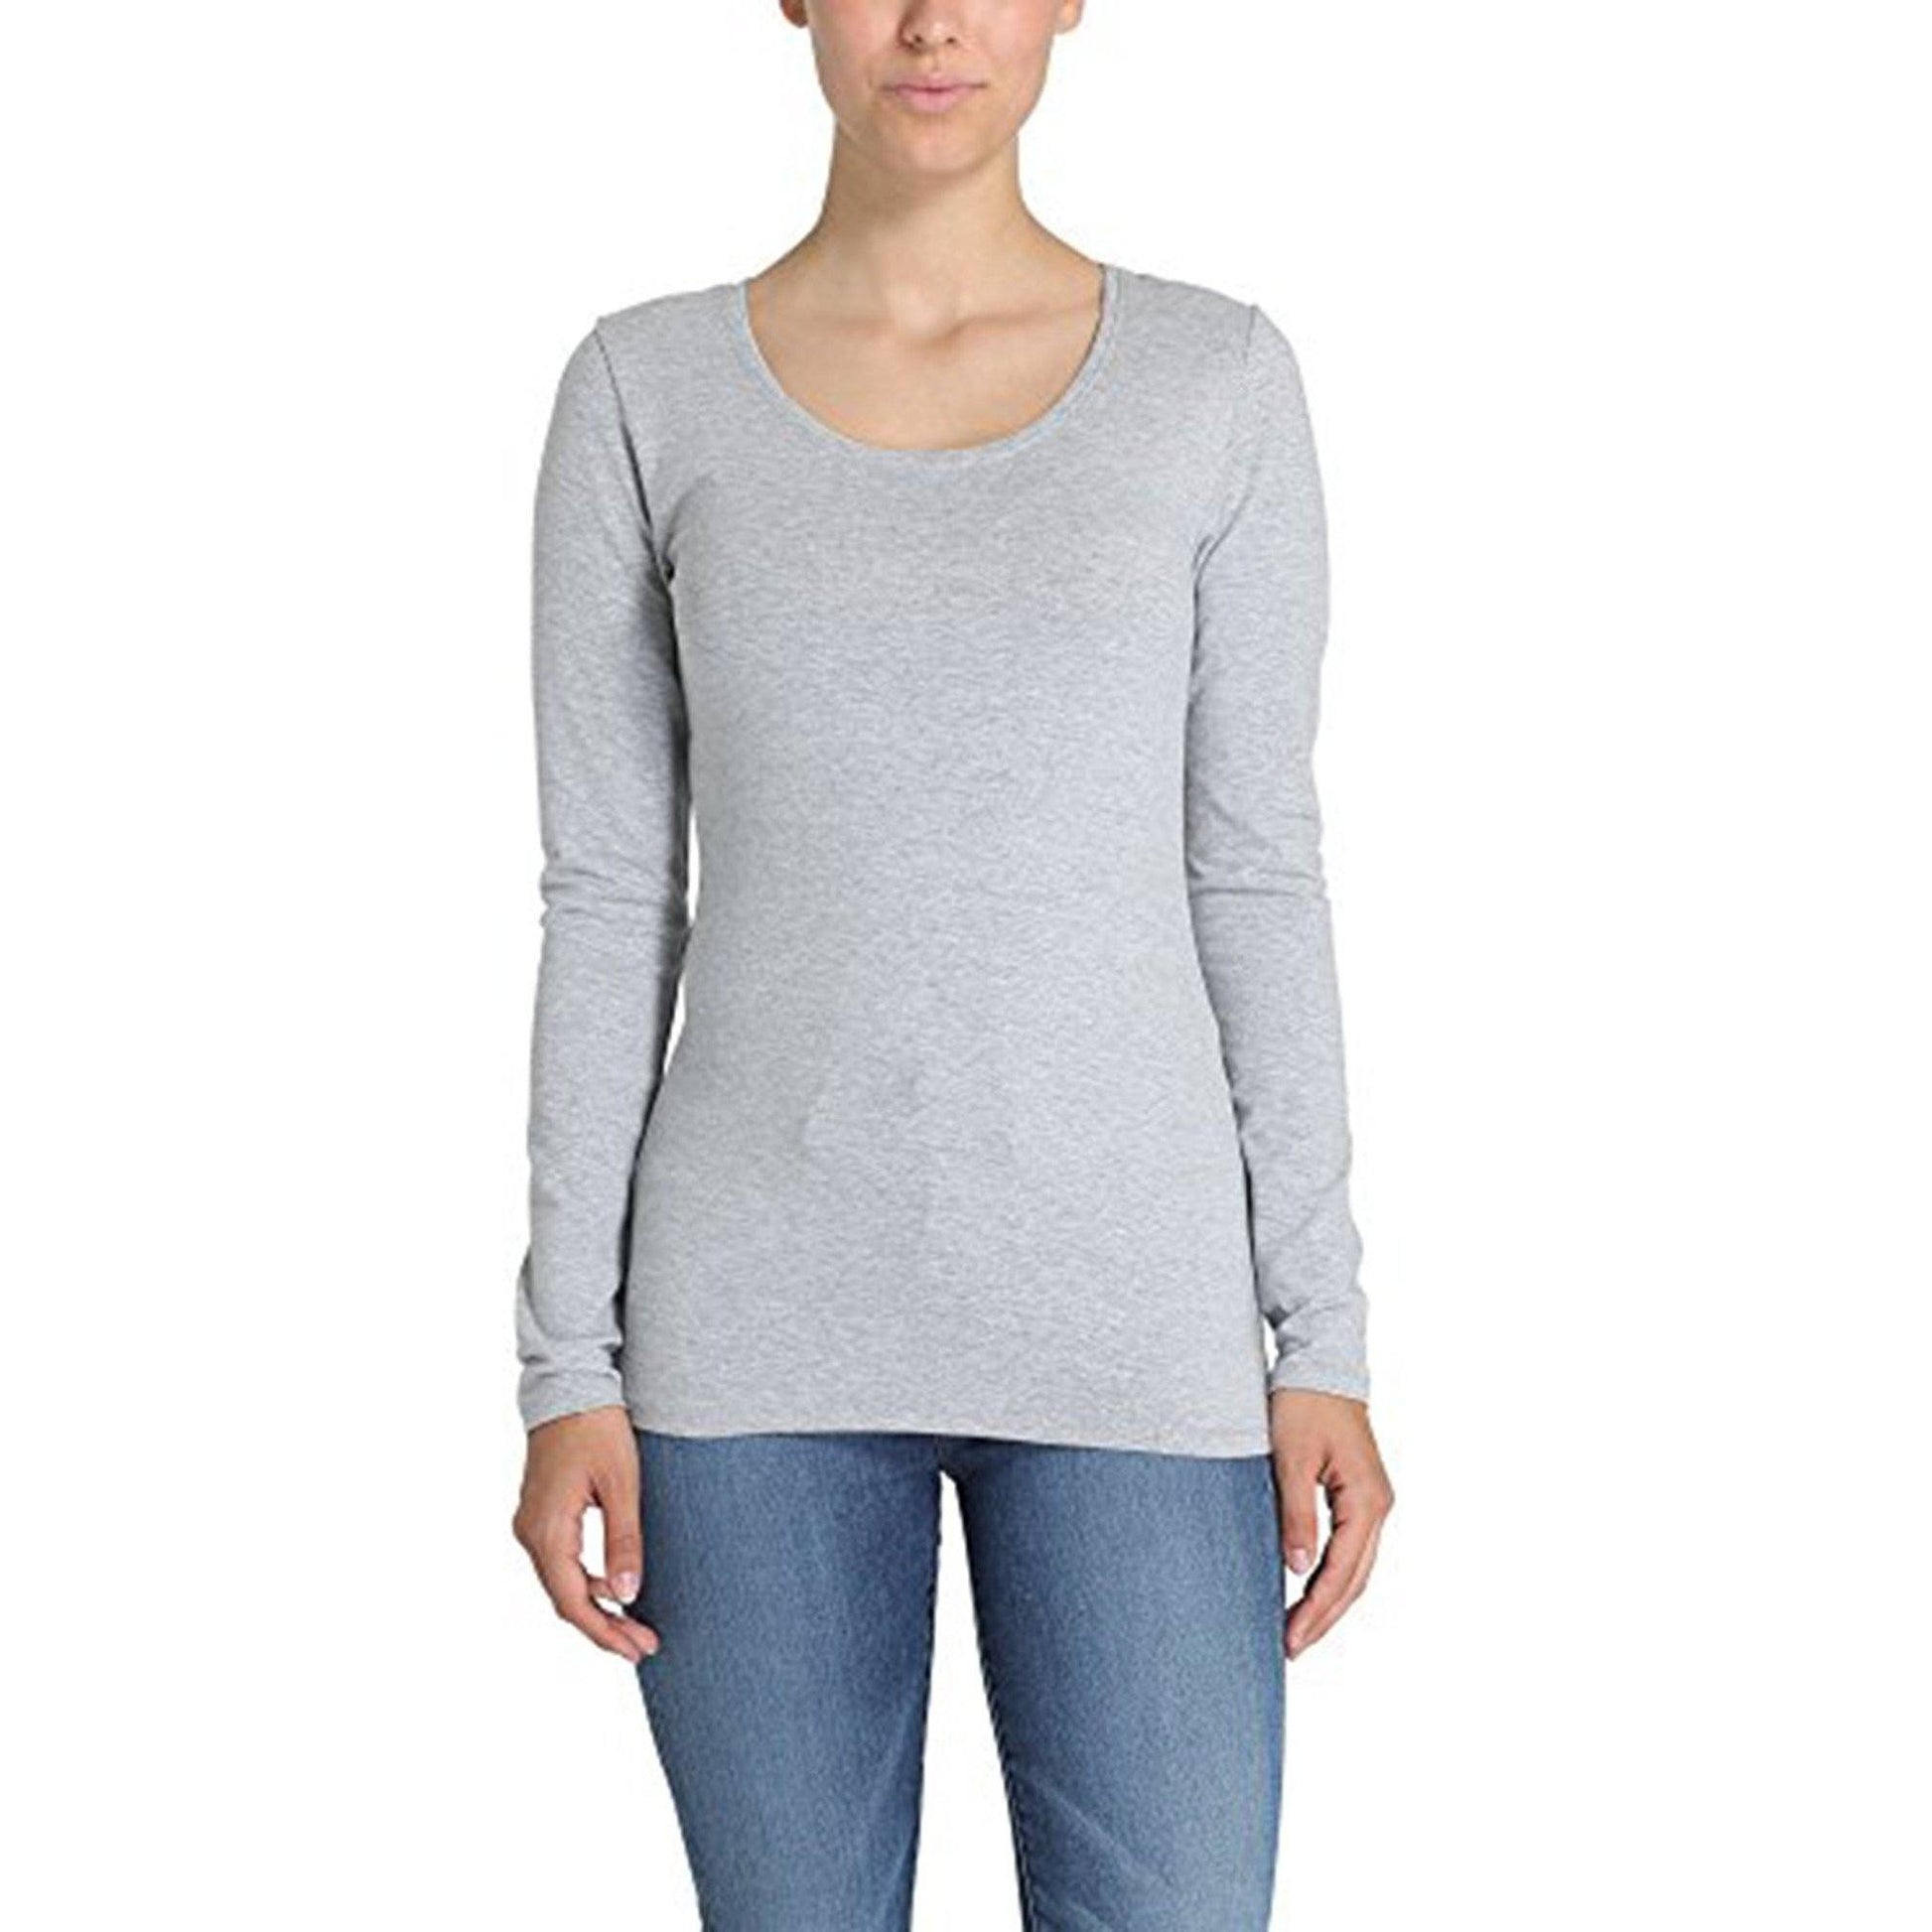 BYD Round Neck Long Sleeve Minor Fault Tee Shirt